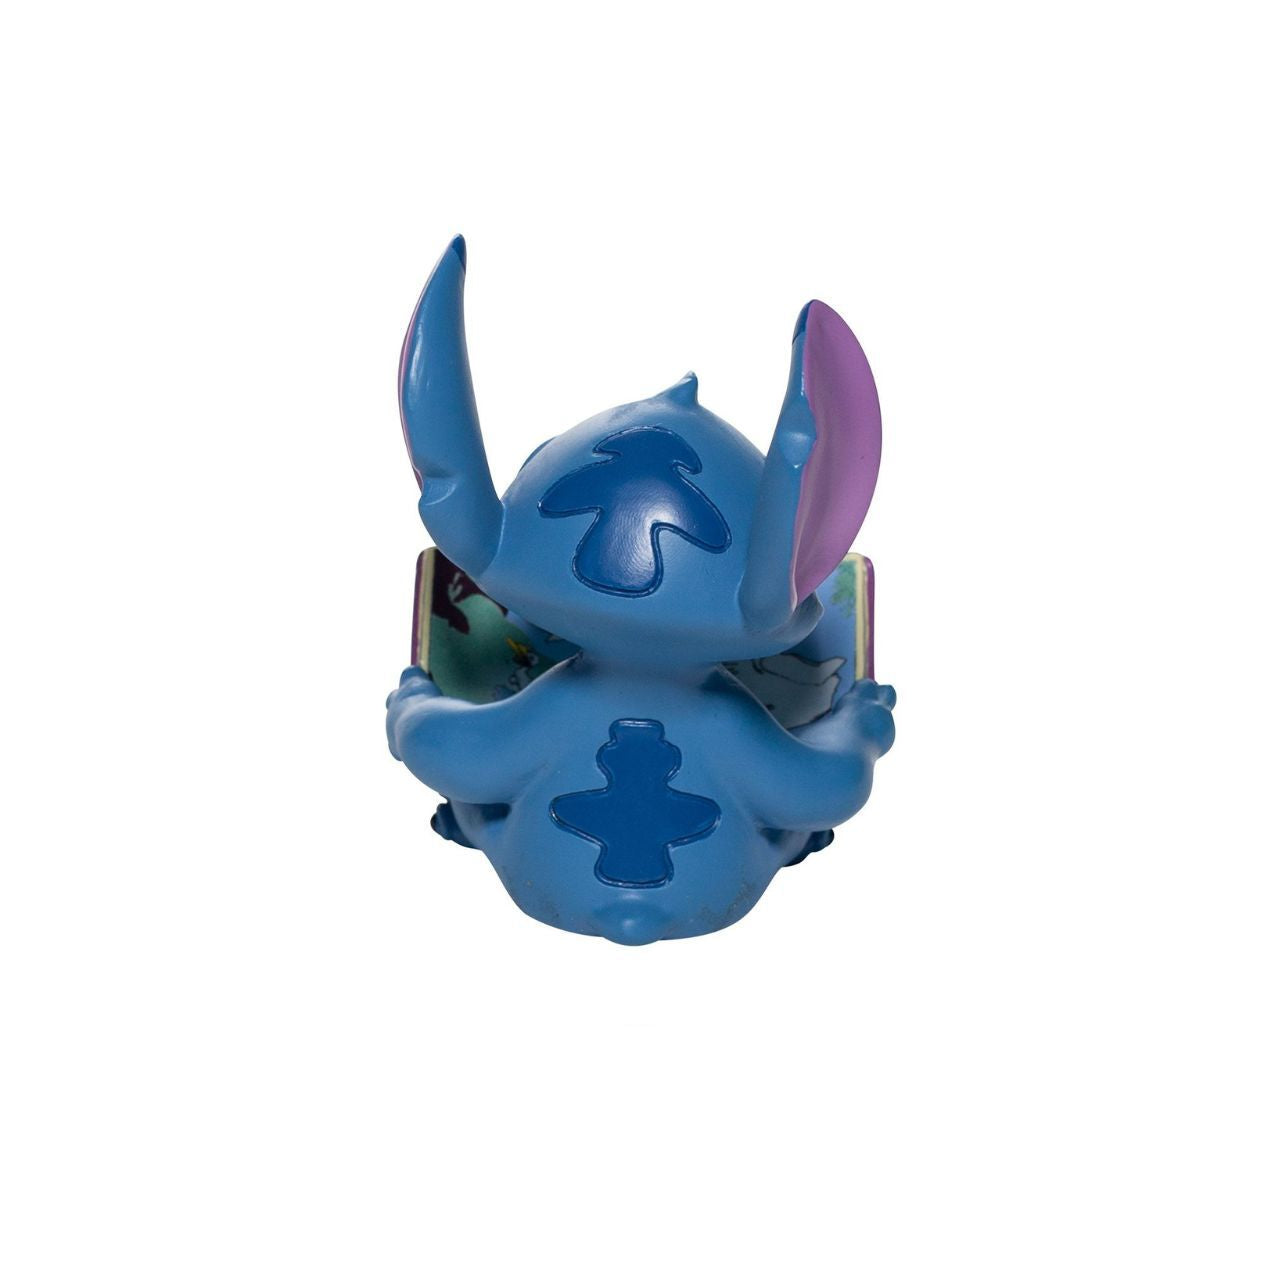 Disney Showcase Stitch Book Figurine  Even adorable Stitch loves a good read. Yes he is cute, charismatic and clever. Ohana means family , making this delightful Stitch a much welcomes addition to the collection of six minis.